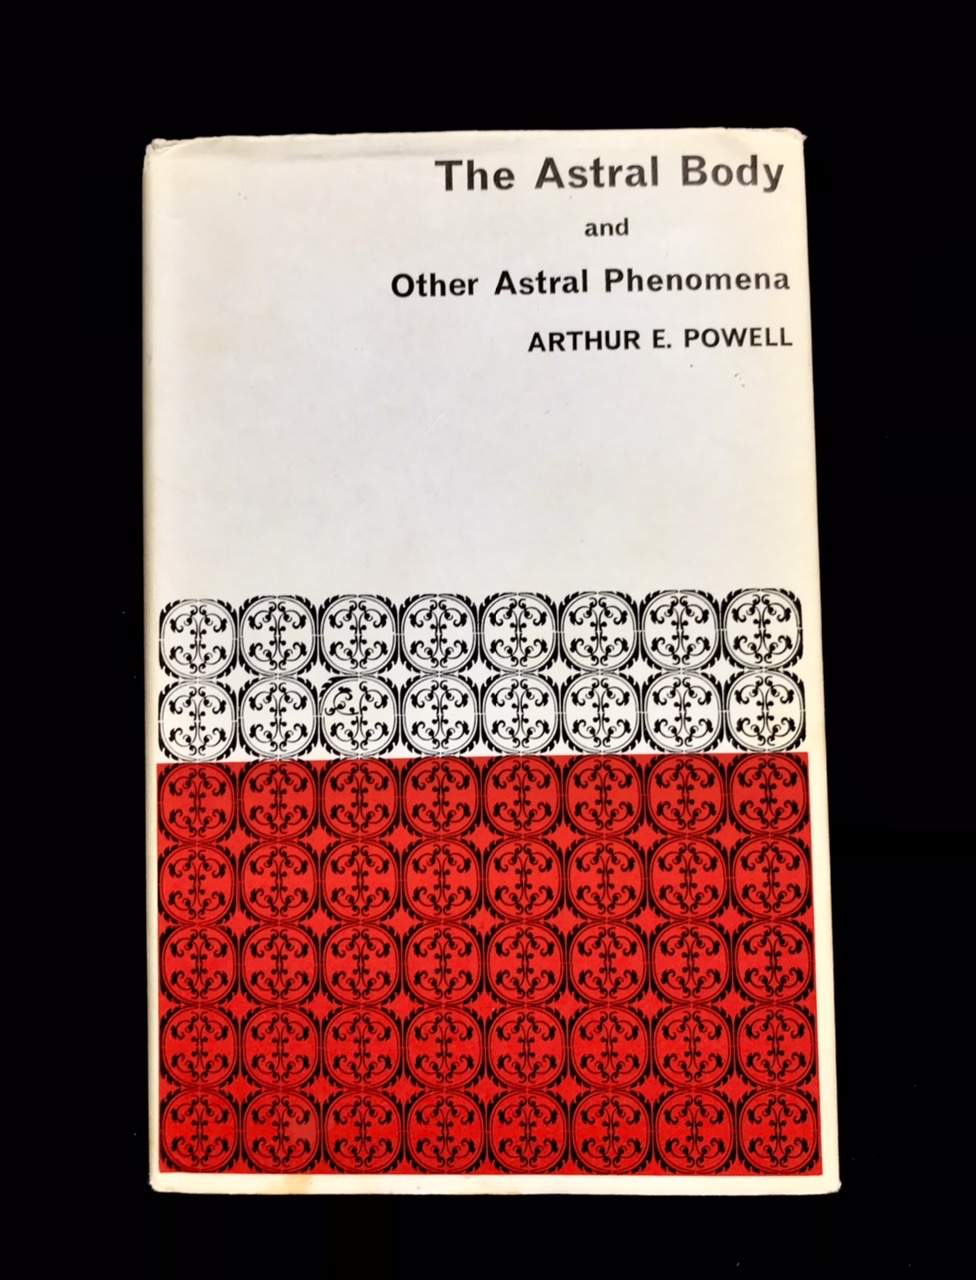 The Astral Body And Other Astral Phenomena by Arthur E. Powell